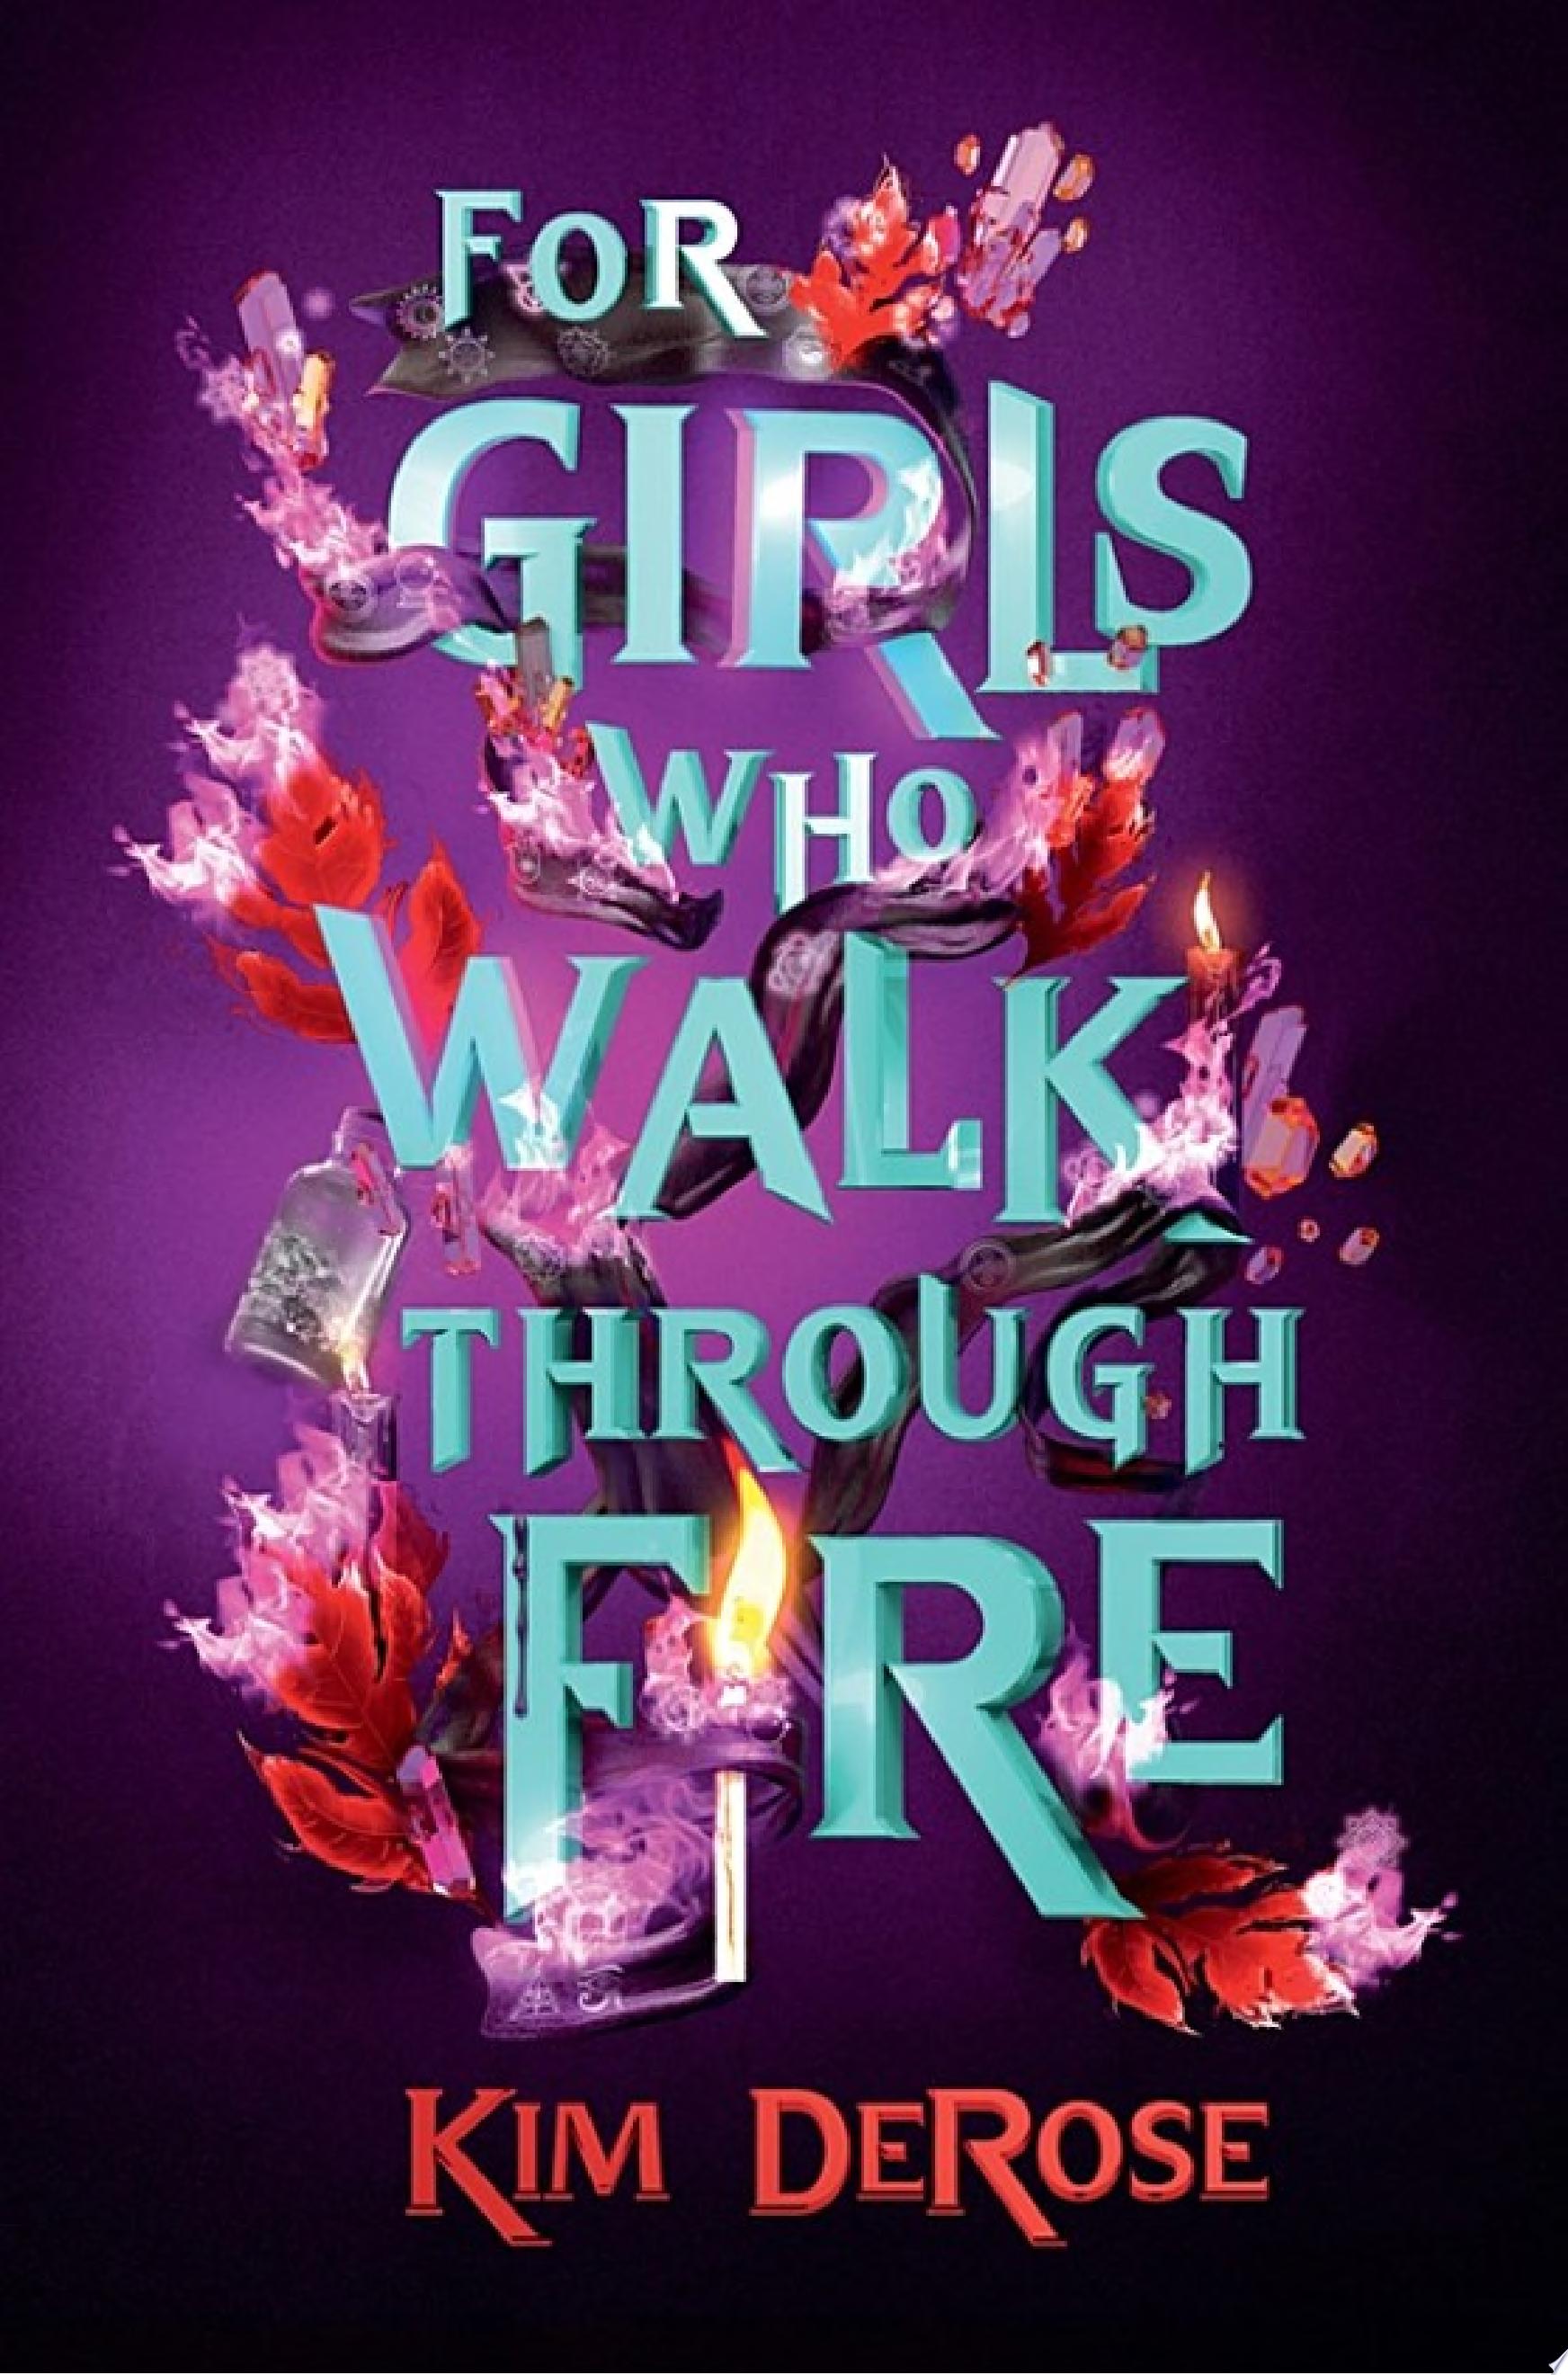 Image for "For Girls Who Walk through Fire"